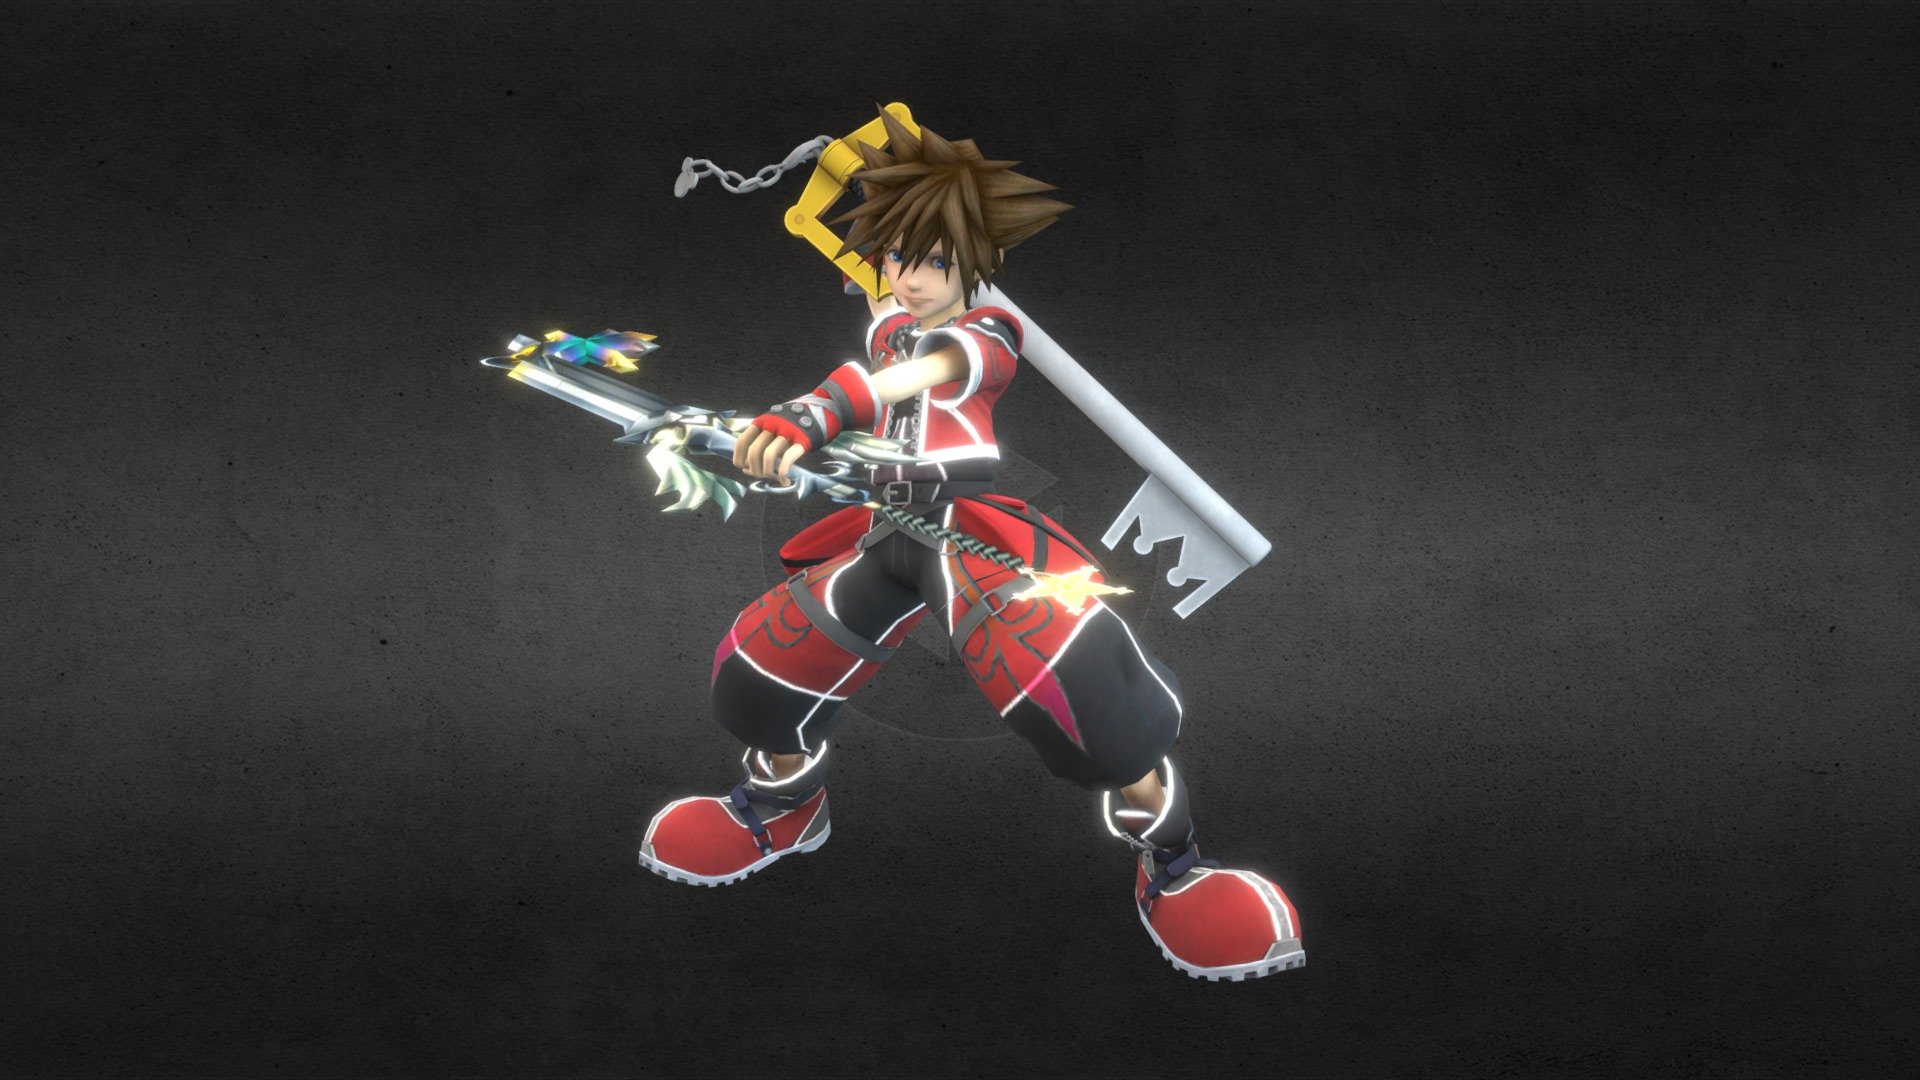 My recreation of Sora’s artwork for his Valor form from Kingdom Hearts 2

No you can’t DL this

I’d a appreciate if you gave this post a like, and that you follow me on sketchfab

ok there's a problem in the face I overlooked. I will fix it as soon as I can - Sora (Valor Form Art) SSBU Styled - 3D model by MG64 (@mariogamer64) 3d model